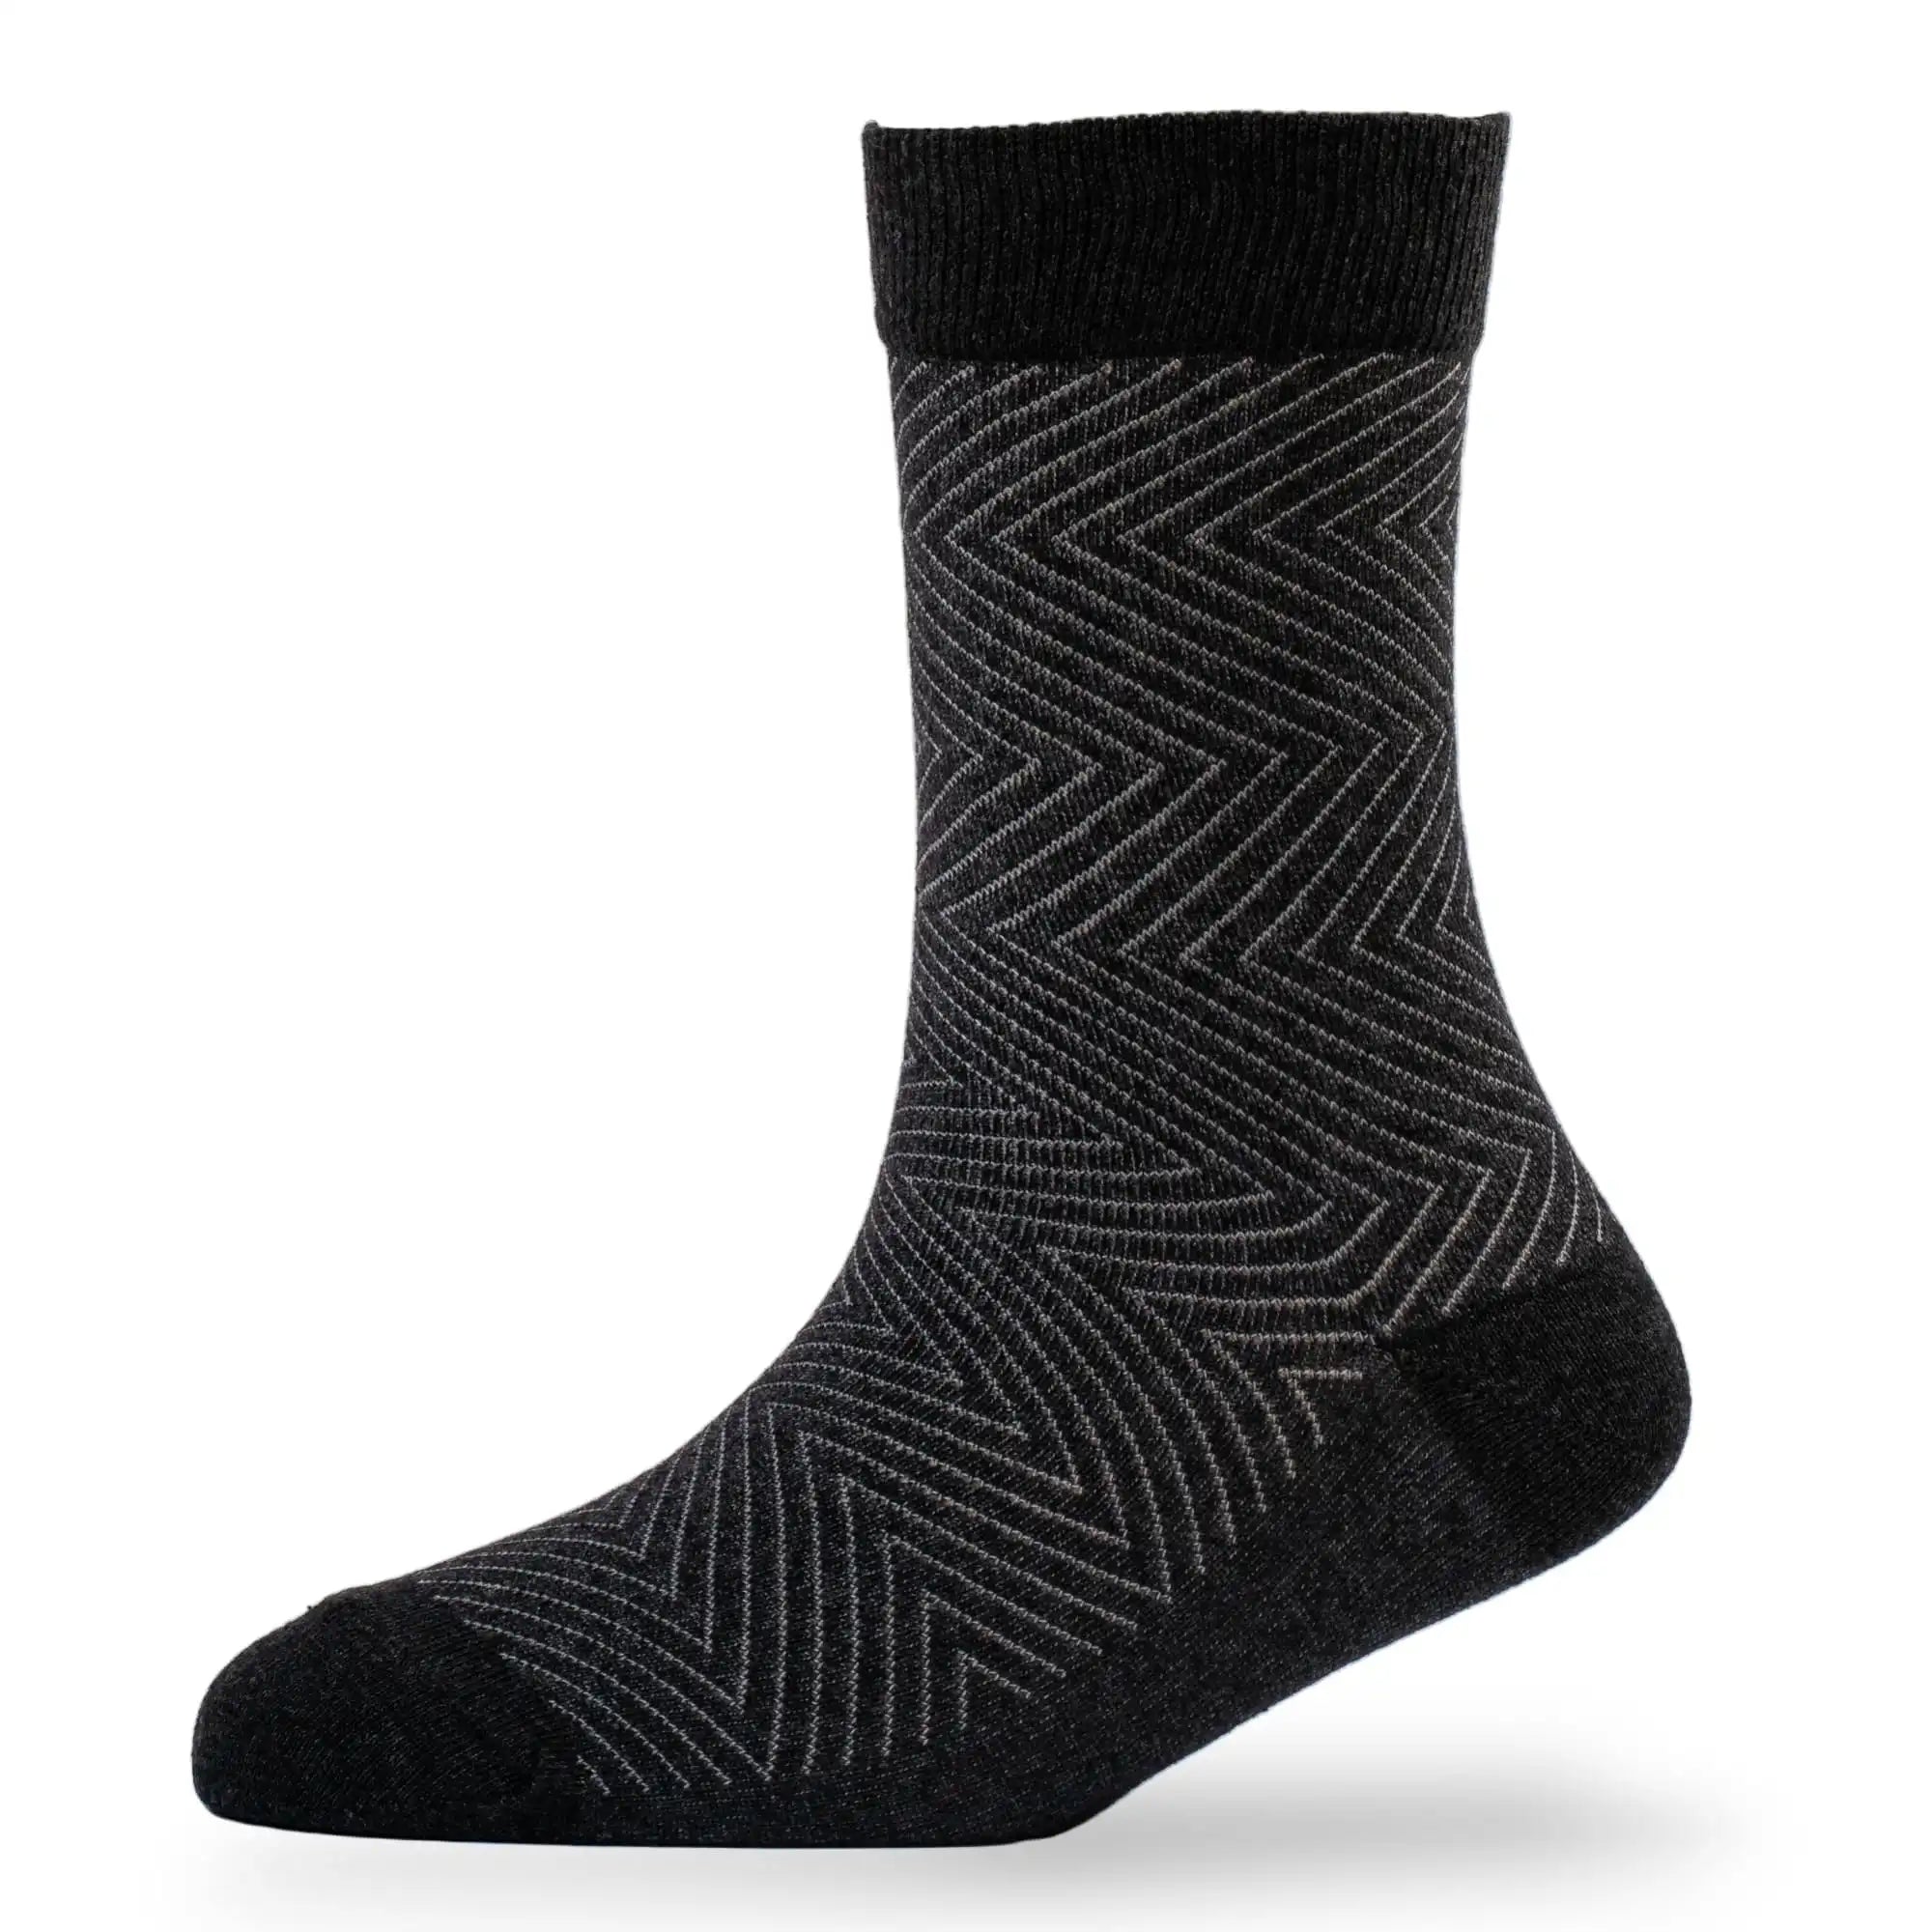 Young Wings Men's Multi Colour Cotton Fabric Solid Full Length Socks - Pack of 5, Style no. 3304-M1